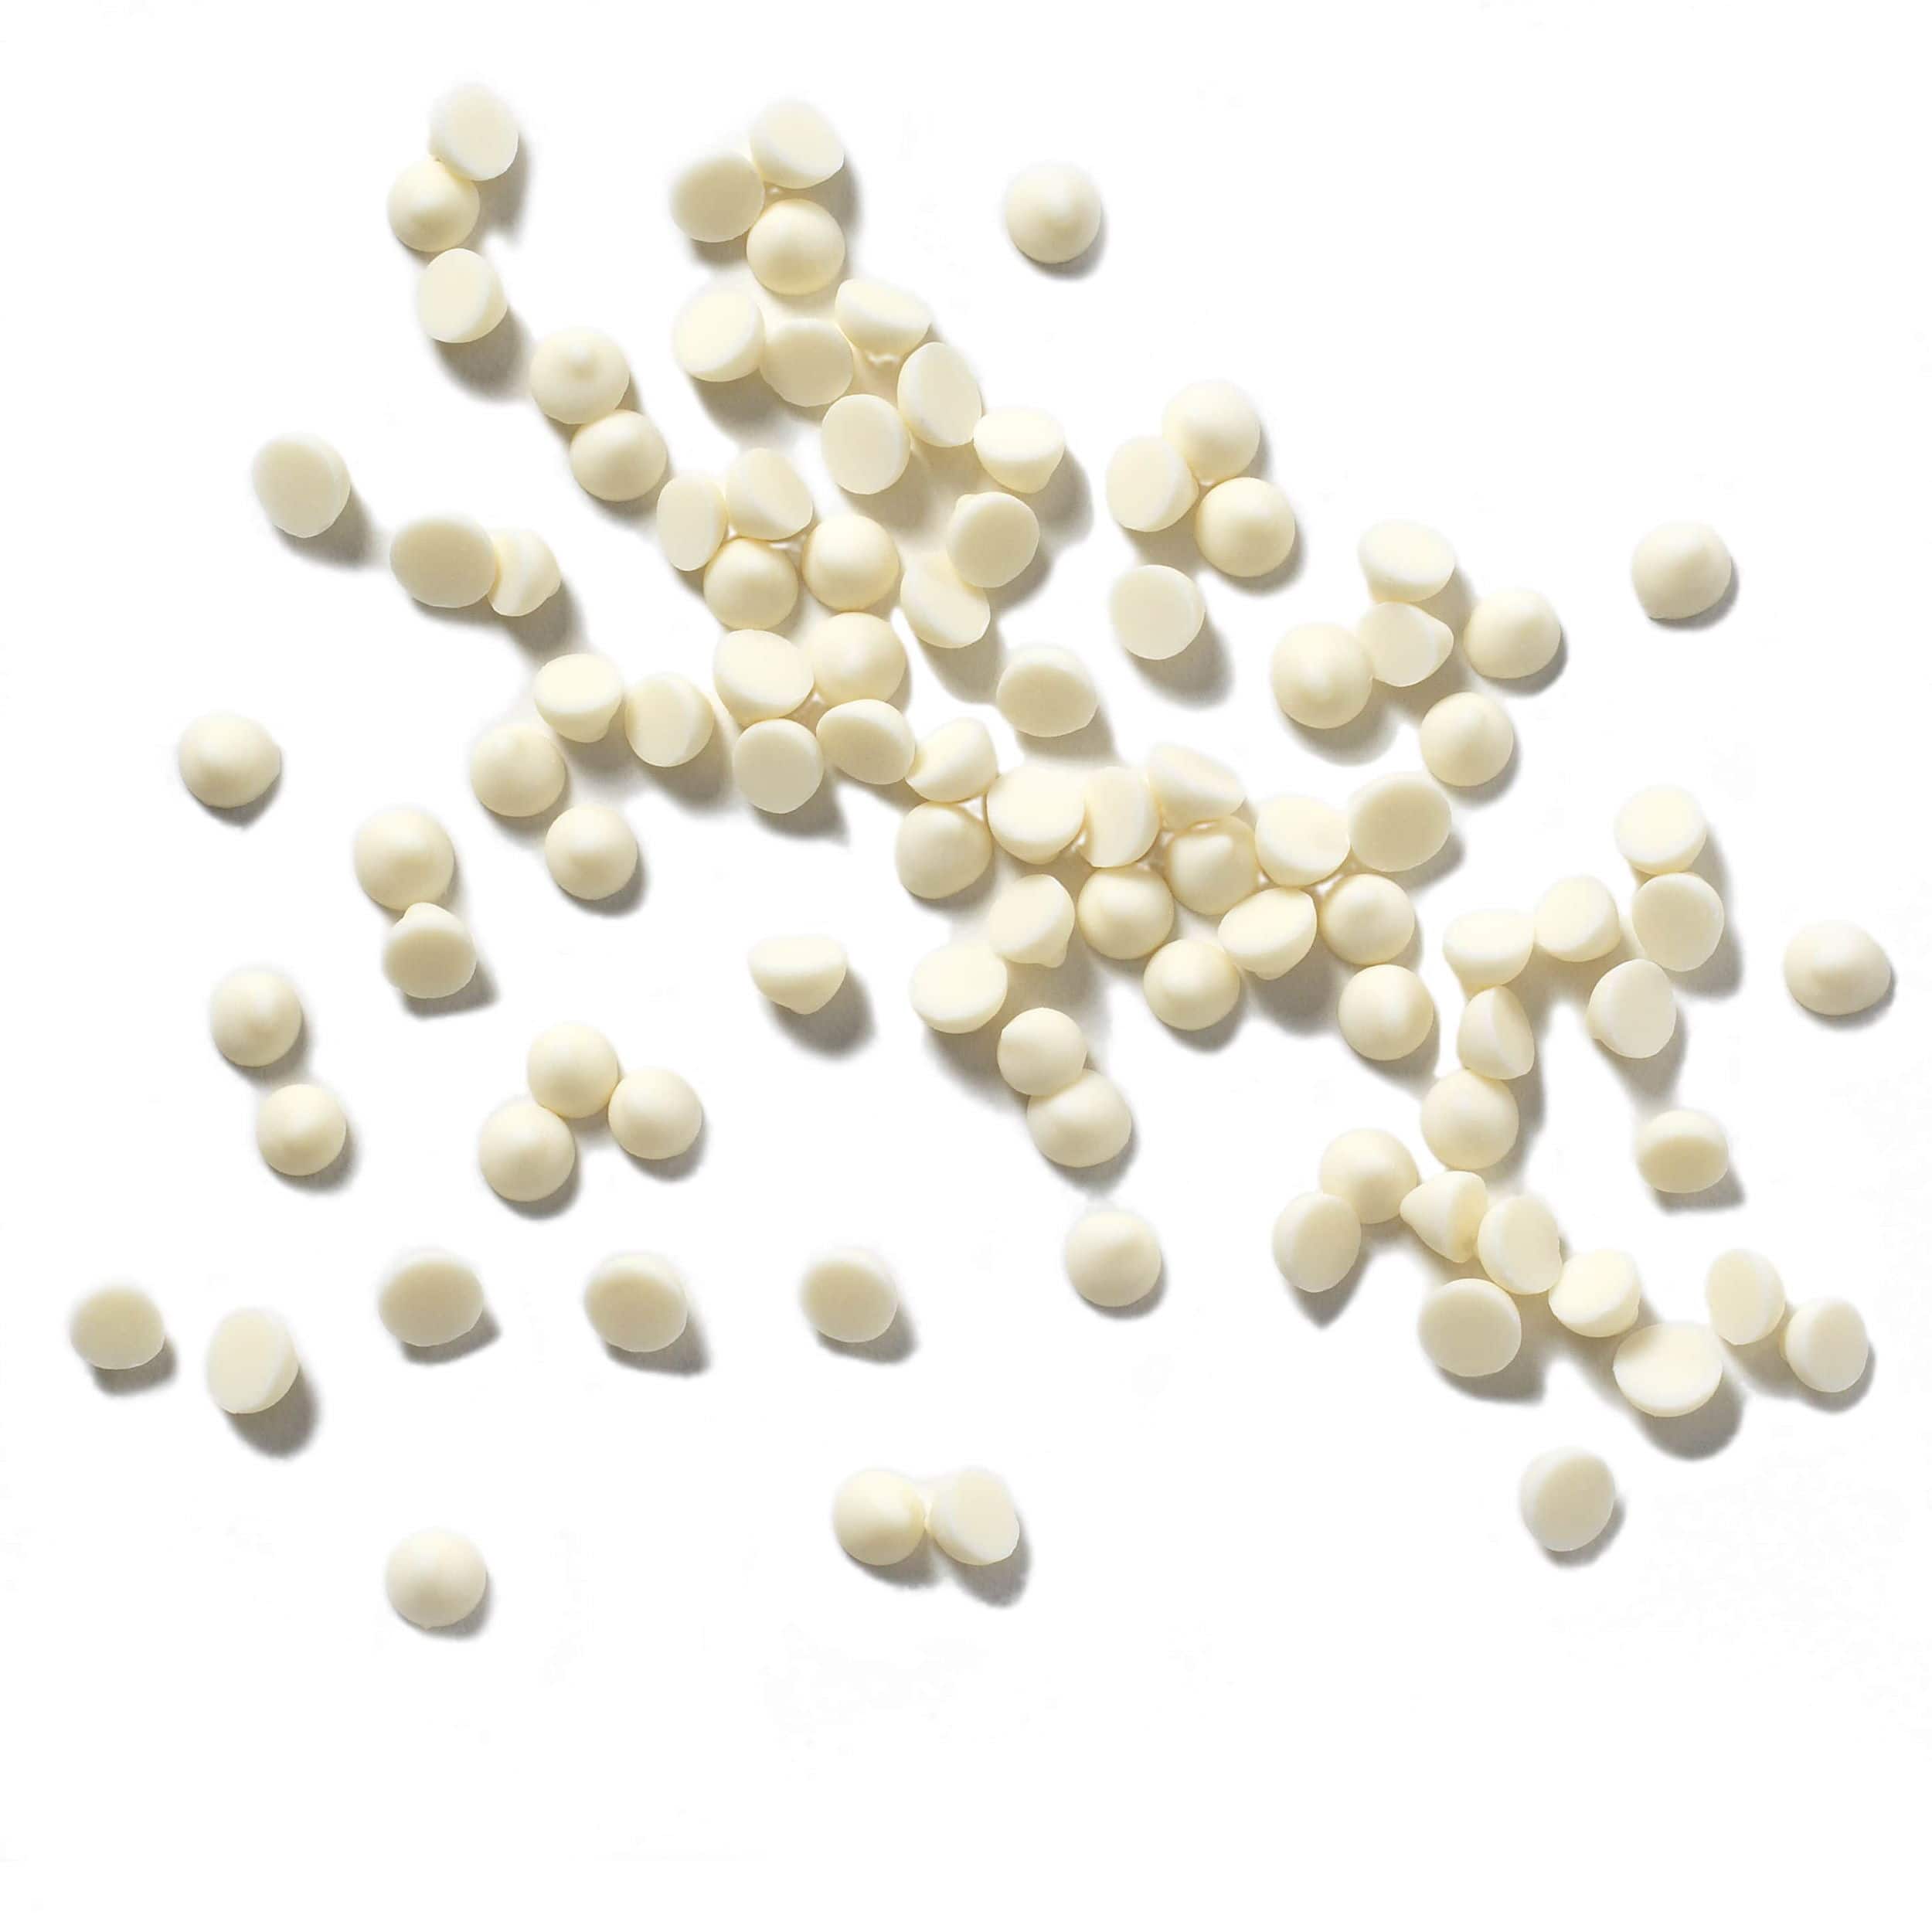 Guittard 4,000-Count Creamy White Cookie Drops-min-min